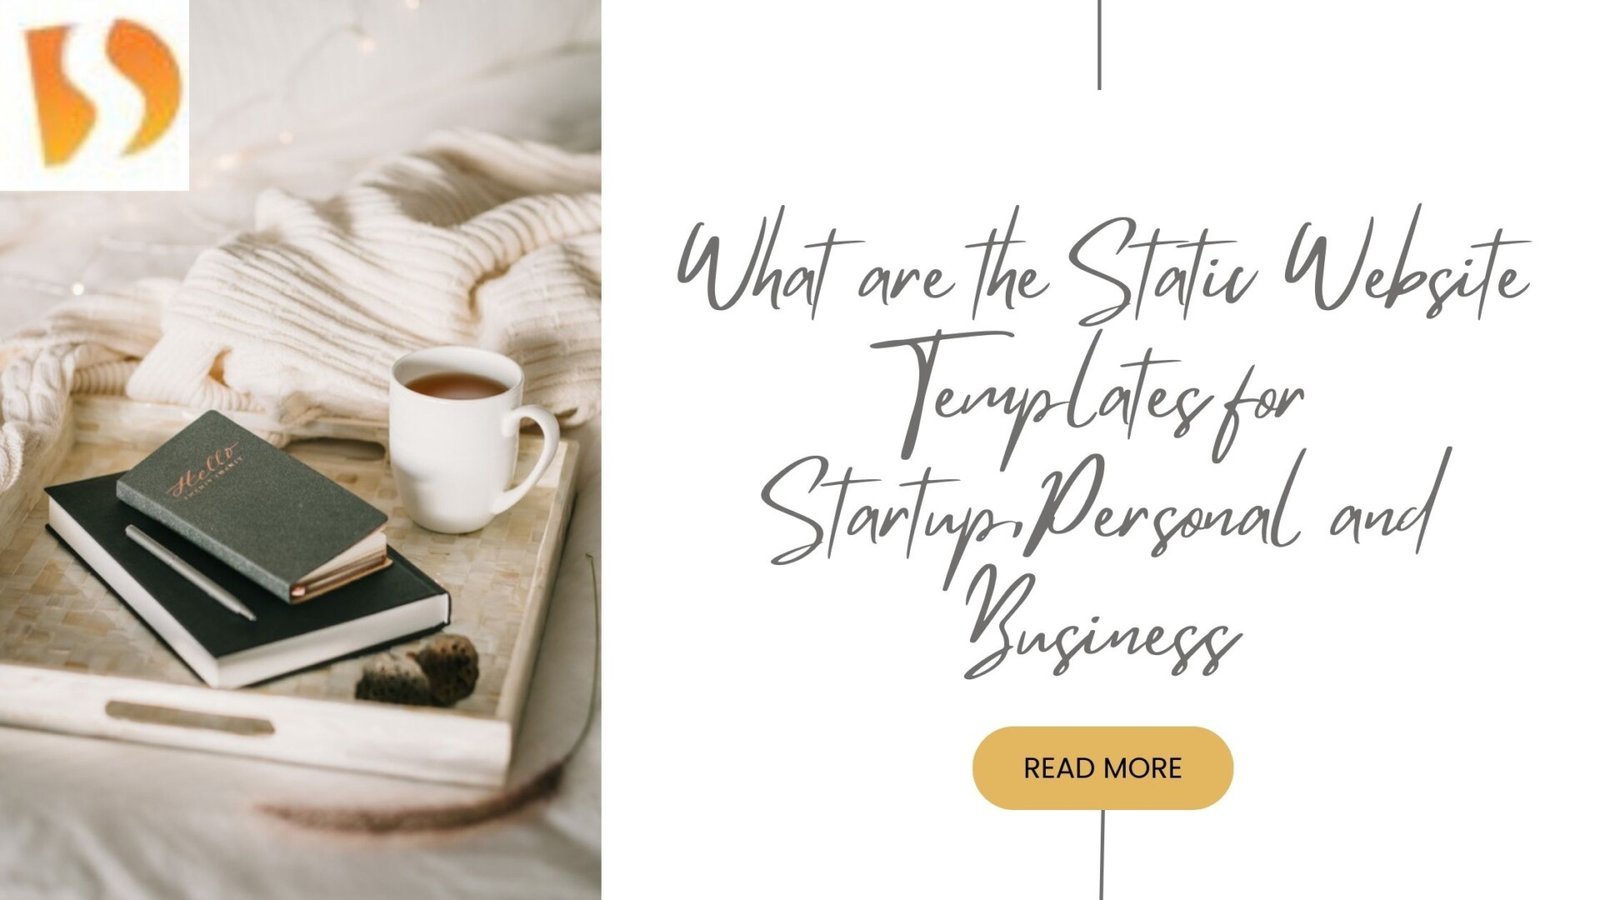 What are the Static Website Templates for Startup,Personal and Business